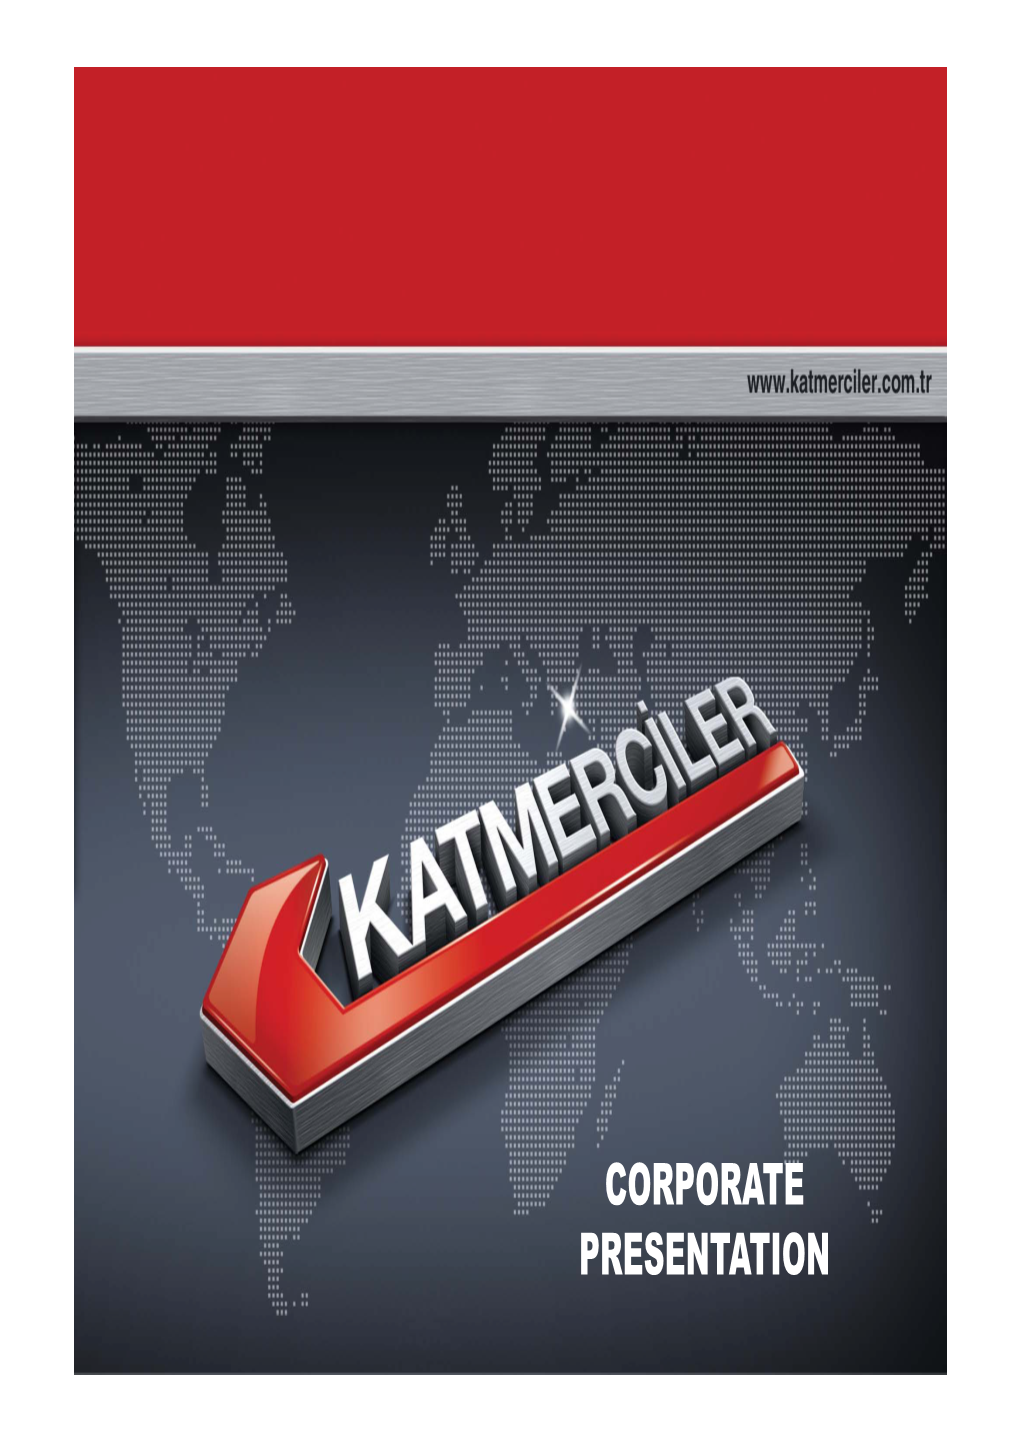 CORPORATE PRESENTATION KATMERCİLER for a Cleaner, Healthier, and More Livable World… MILESTONES